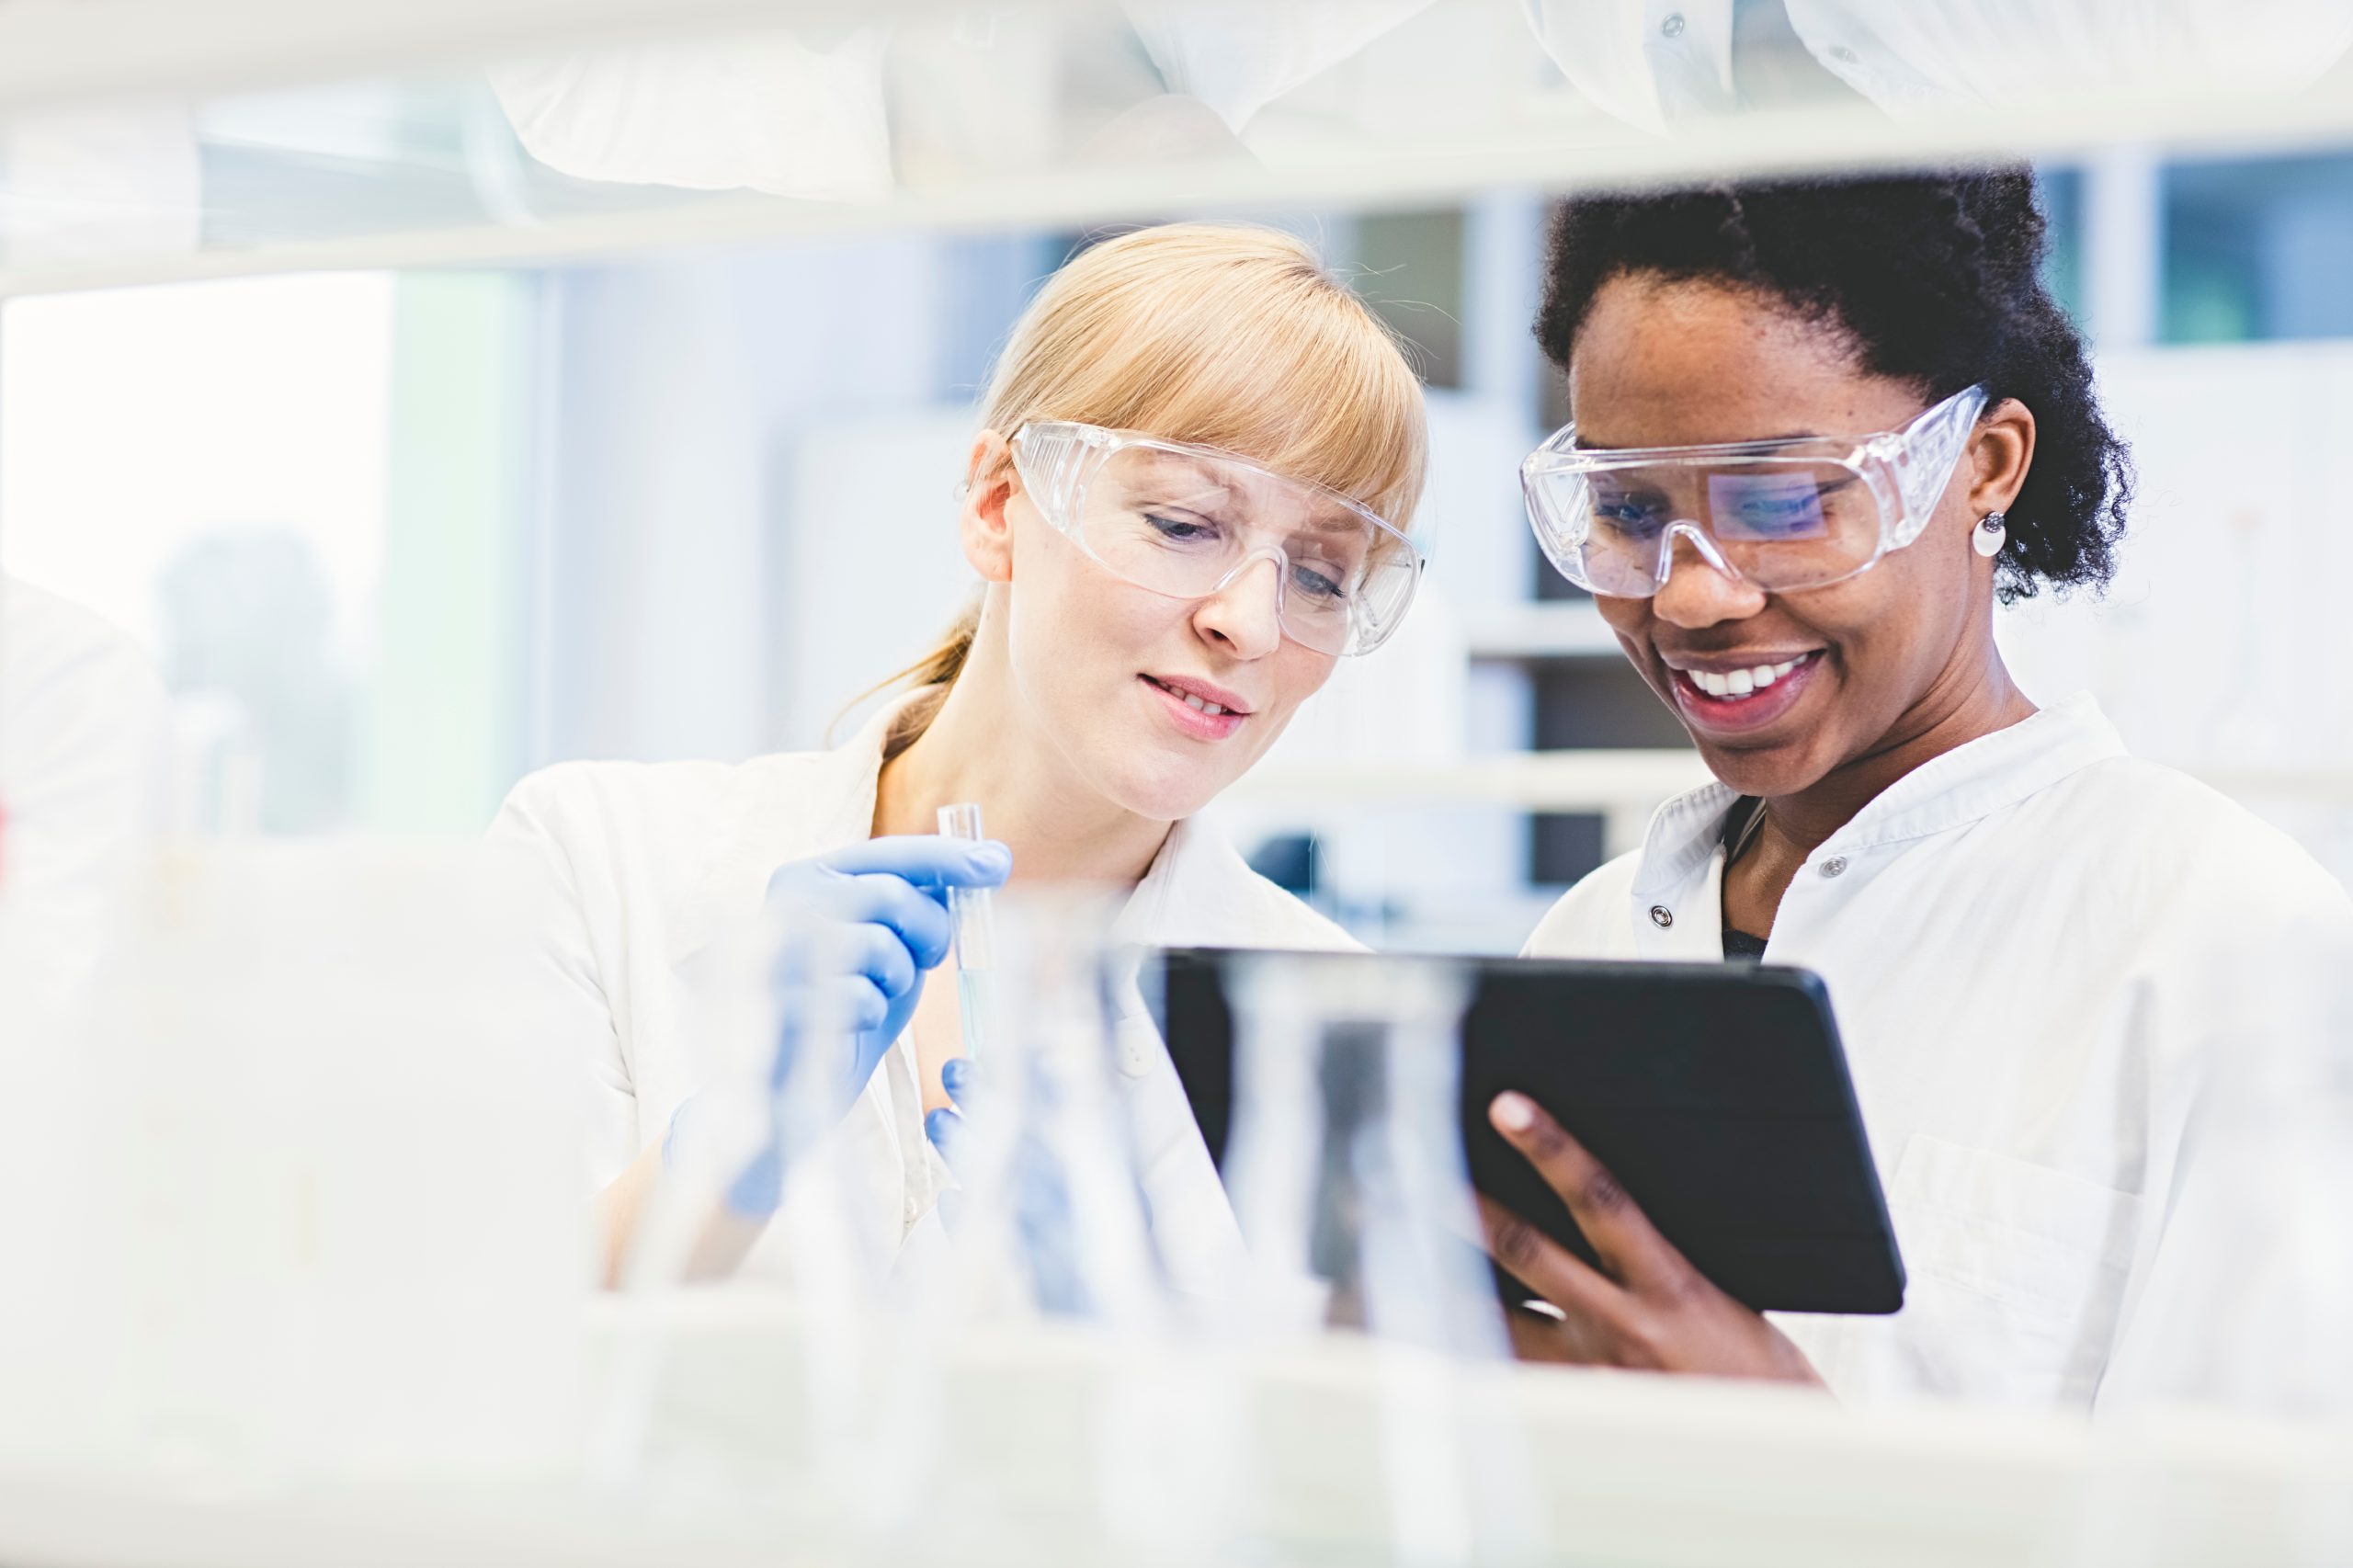 Two smiling female scientists in a lab observing a tablet